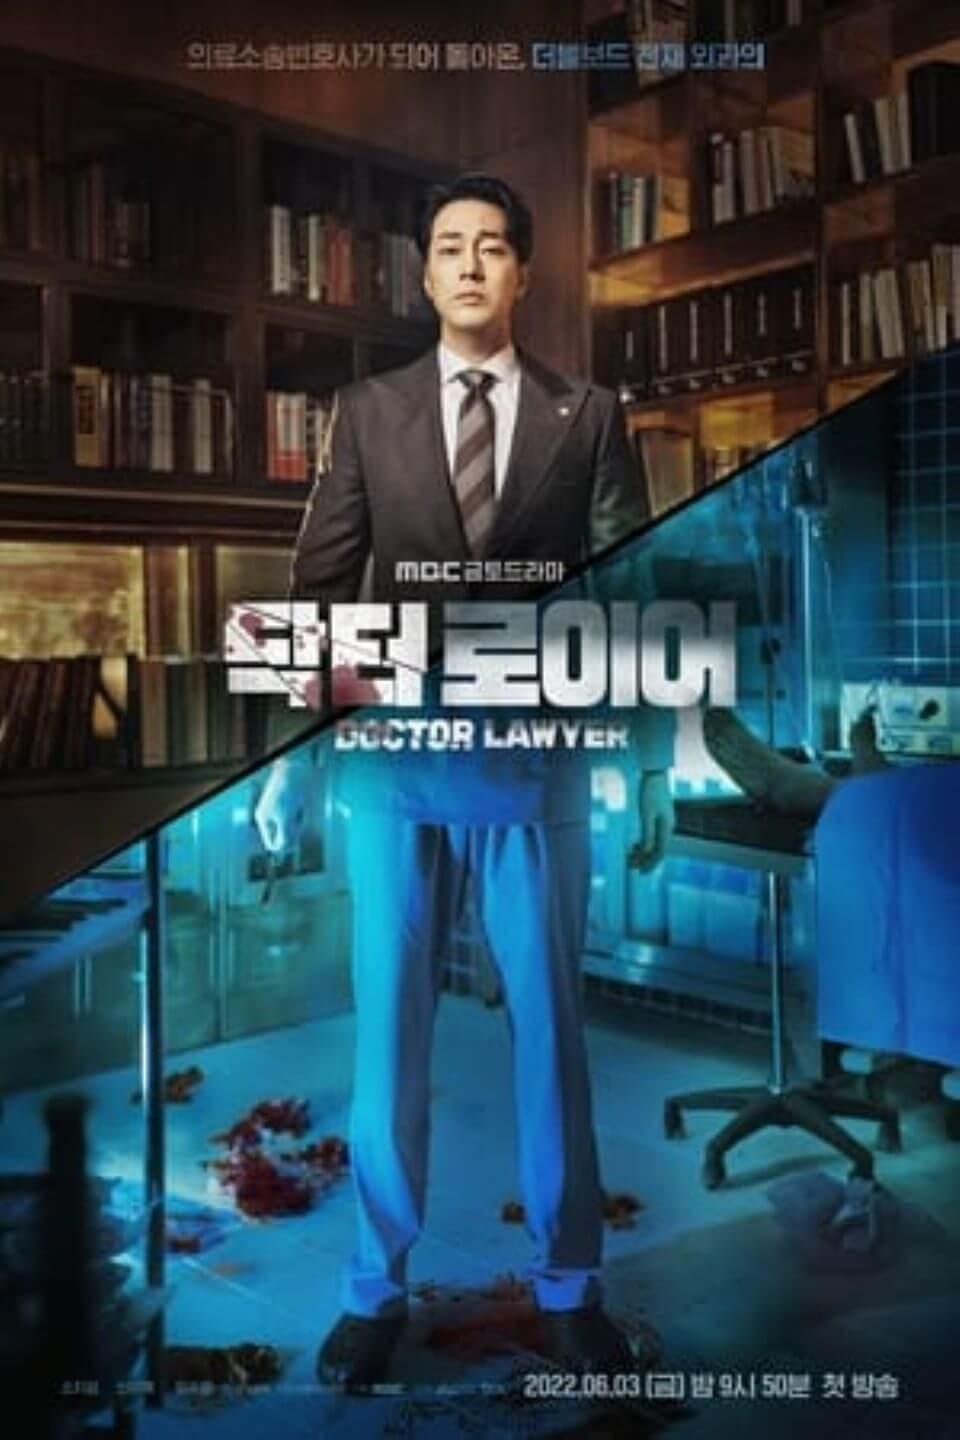 TV ratings for Doctor Lawyer (닥터 로이어) in Portugal. MBC TV series